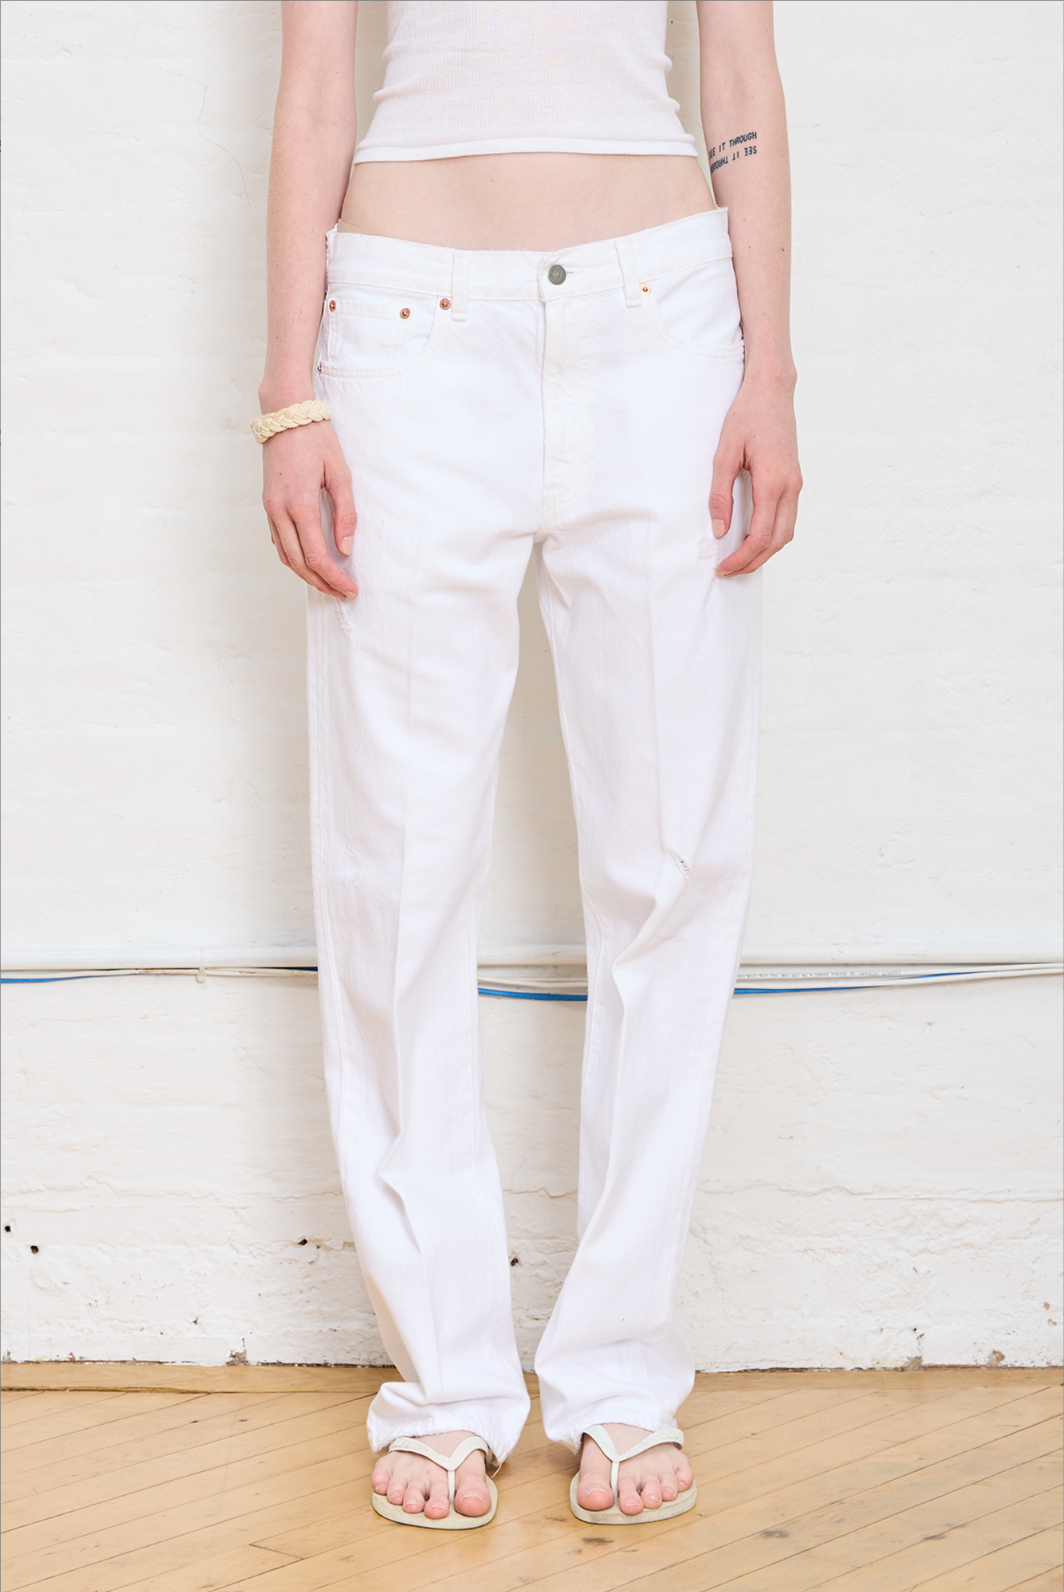 LUCY LONG BF JEAN IN WHITE WASH - Romi Boutique